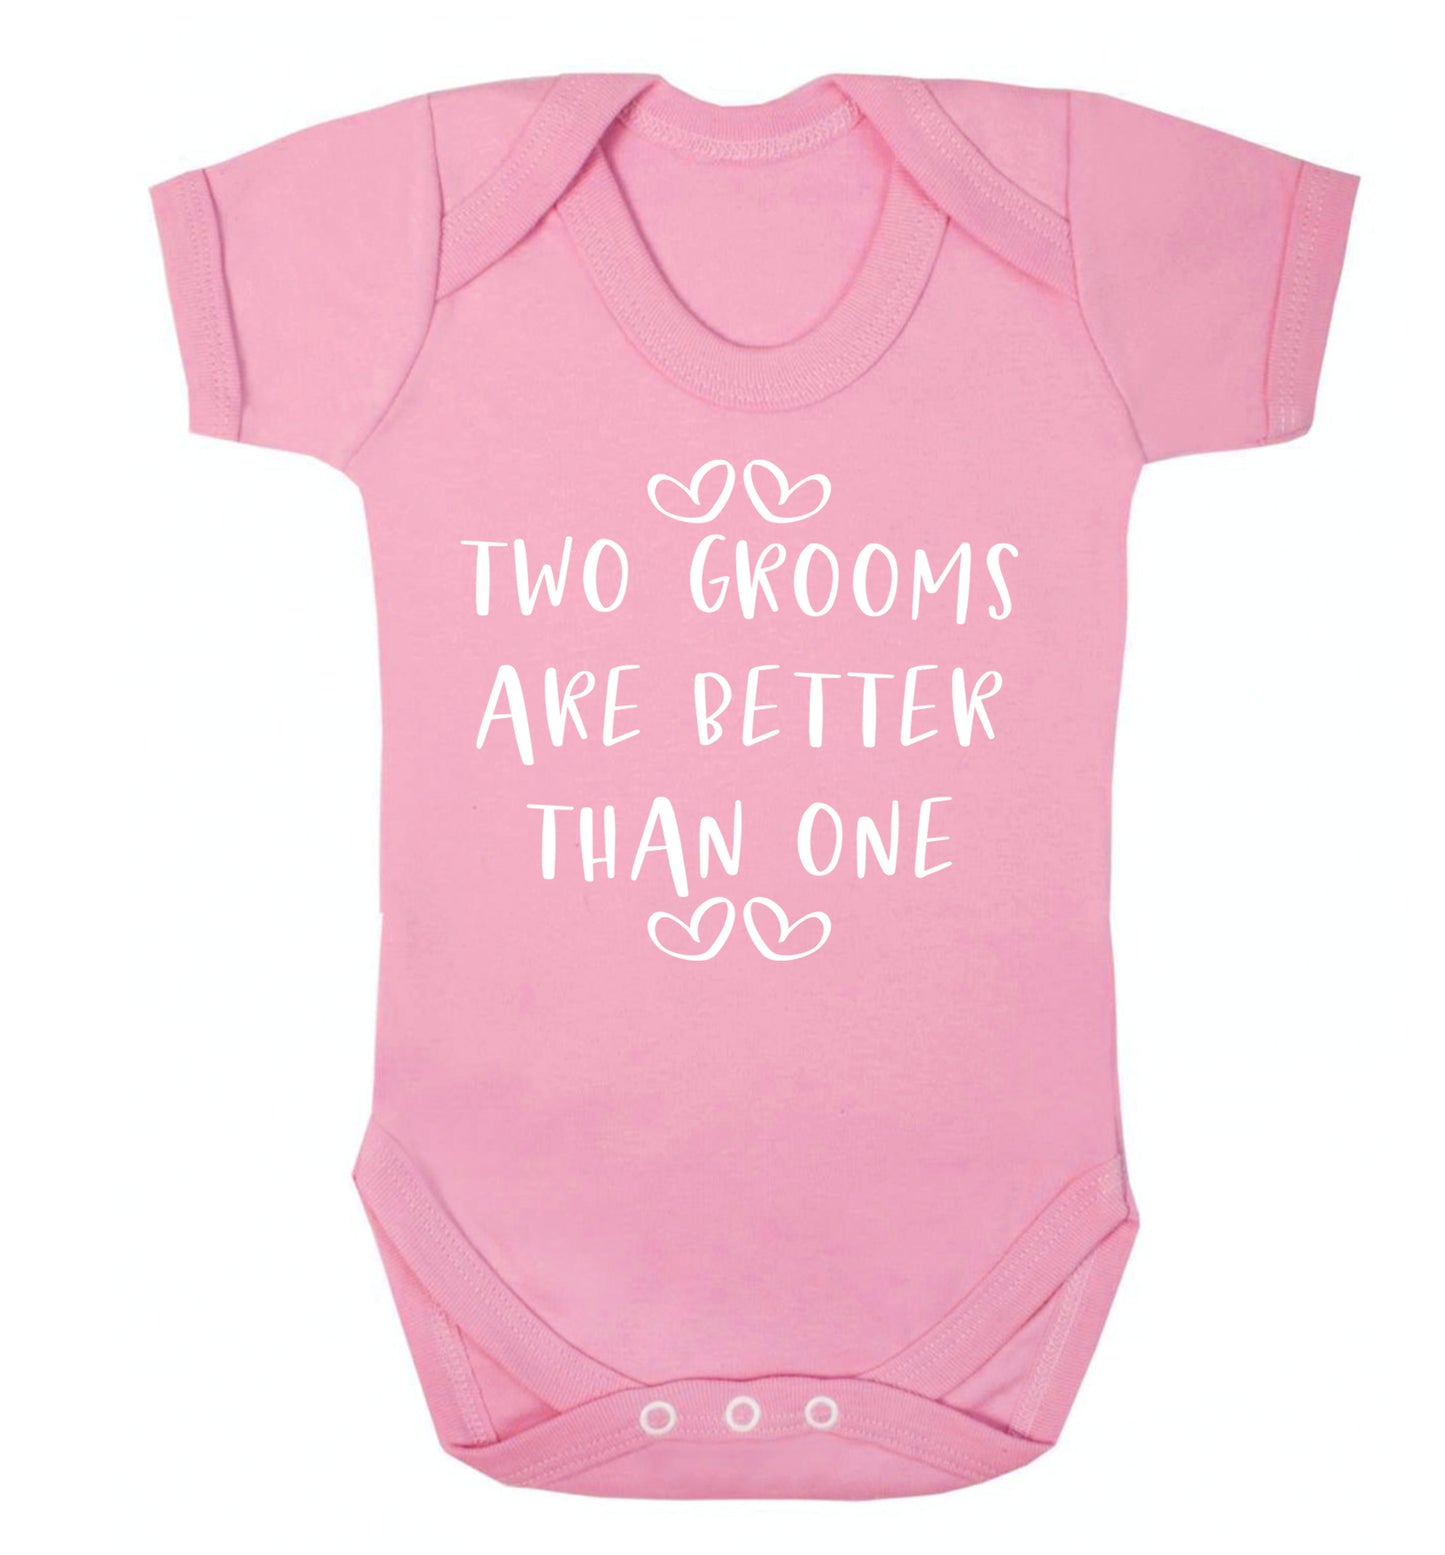 Two grooms are better than one baby vest pale pink 18-24 months